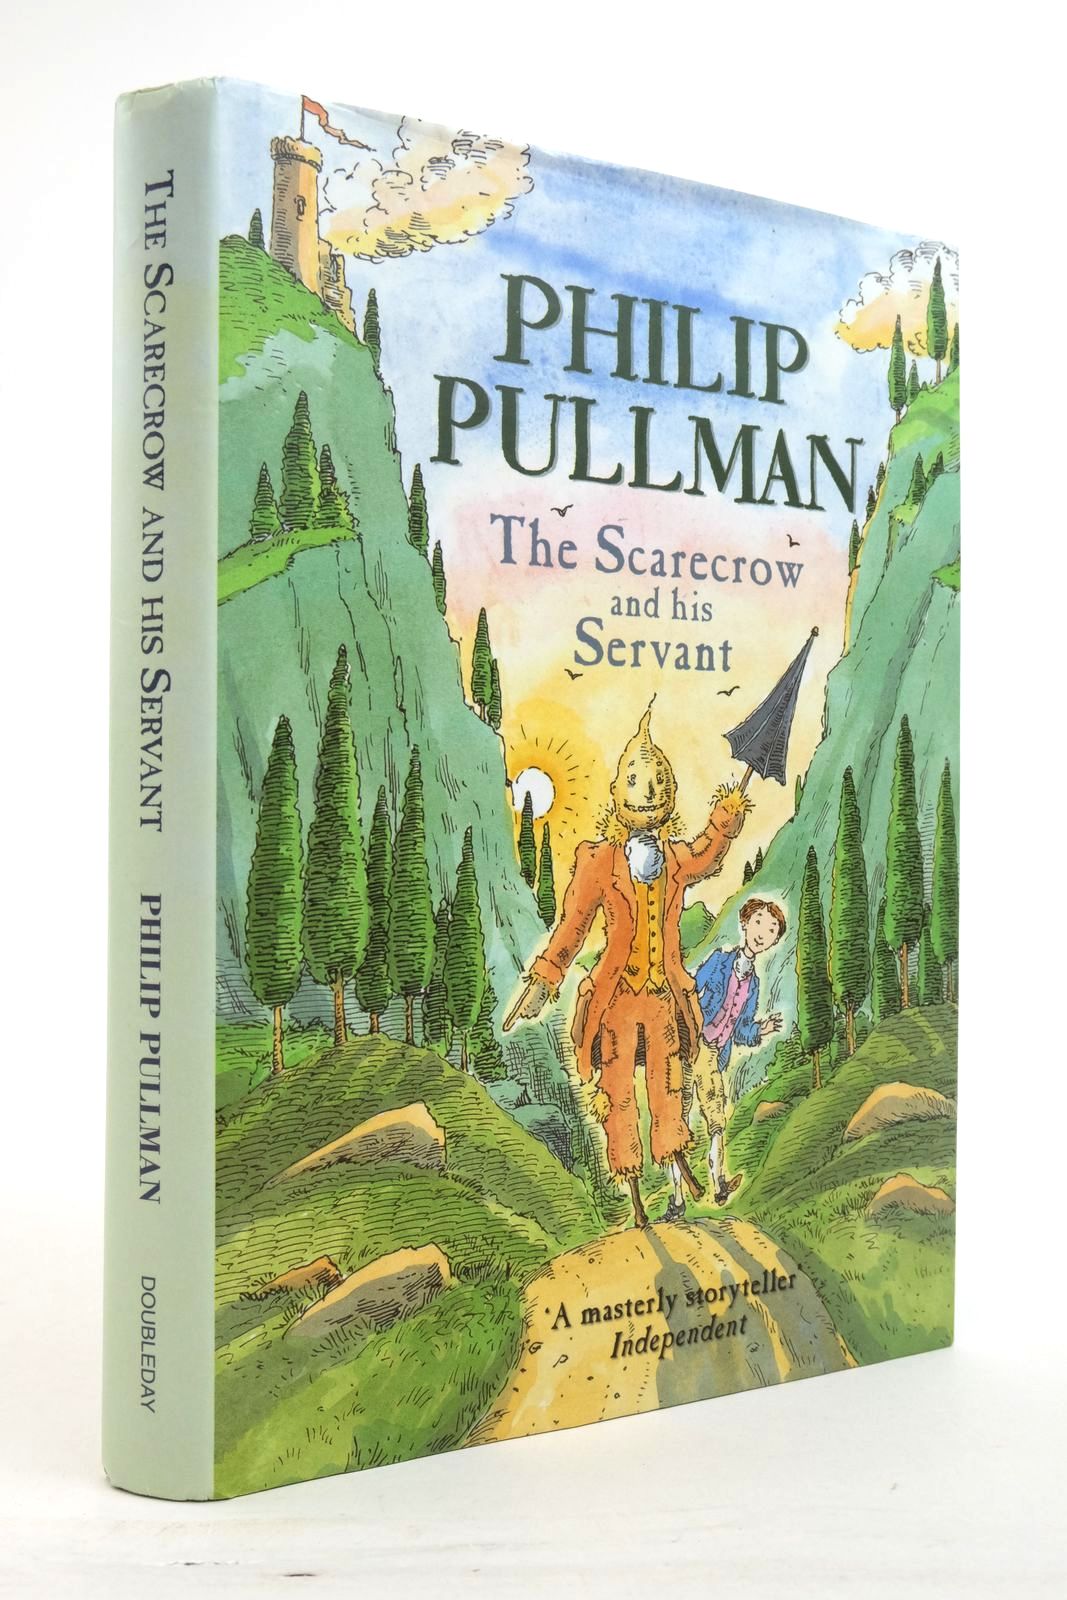 Photo of THE SCARECROW AND HIS SERVANT written by Pullman, Philip illustrated by Bailey, Peter published by Doubleday (STOCK CODE: 2137157)  for sale by Stella & Rose's Books